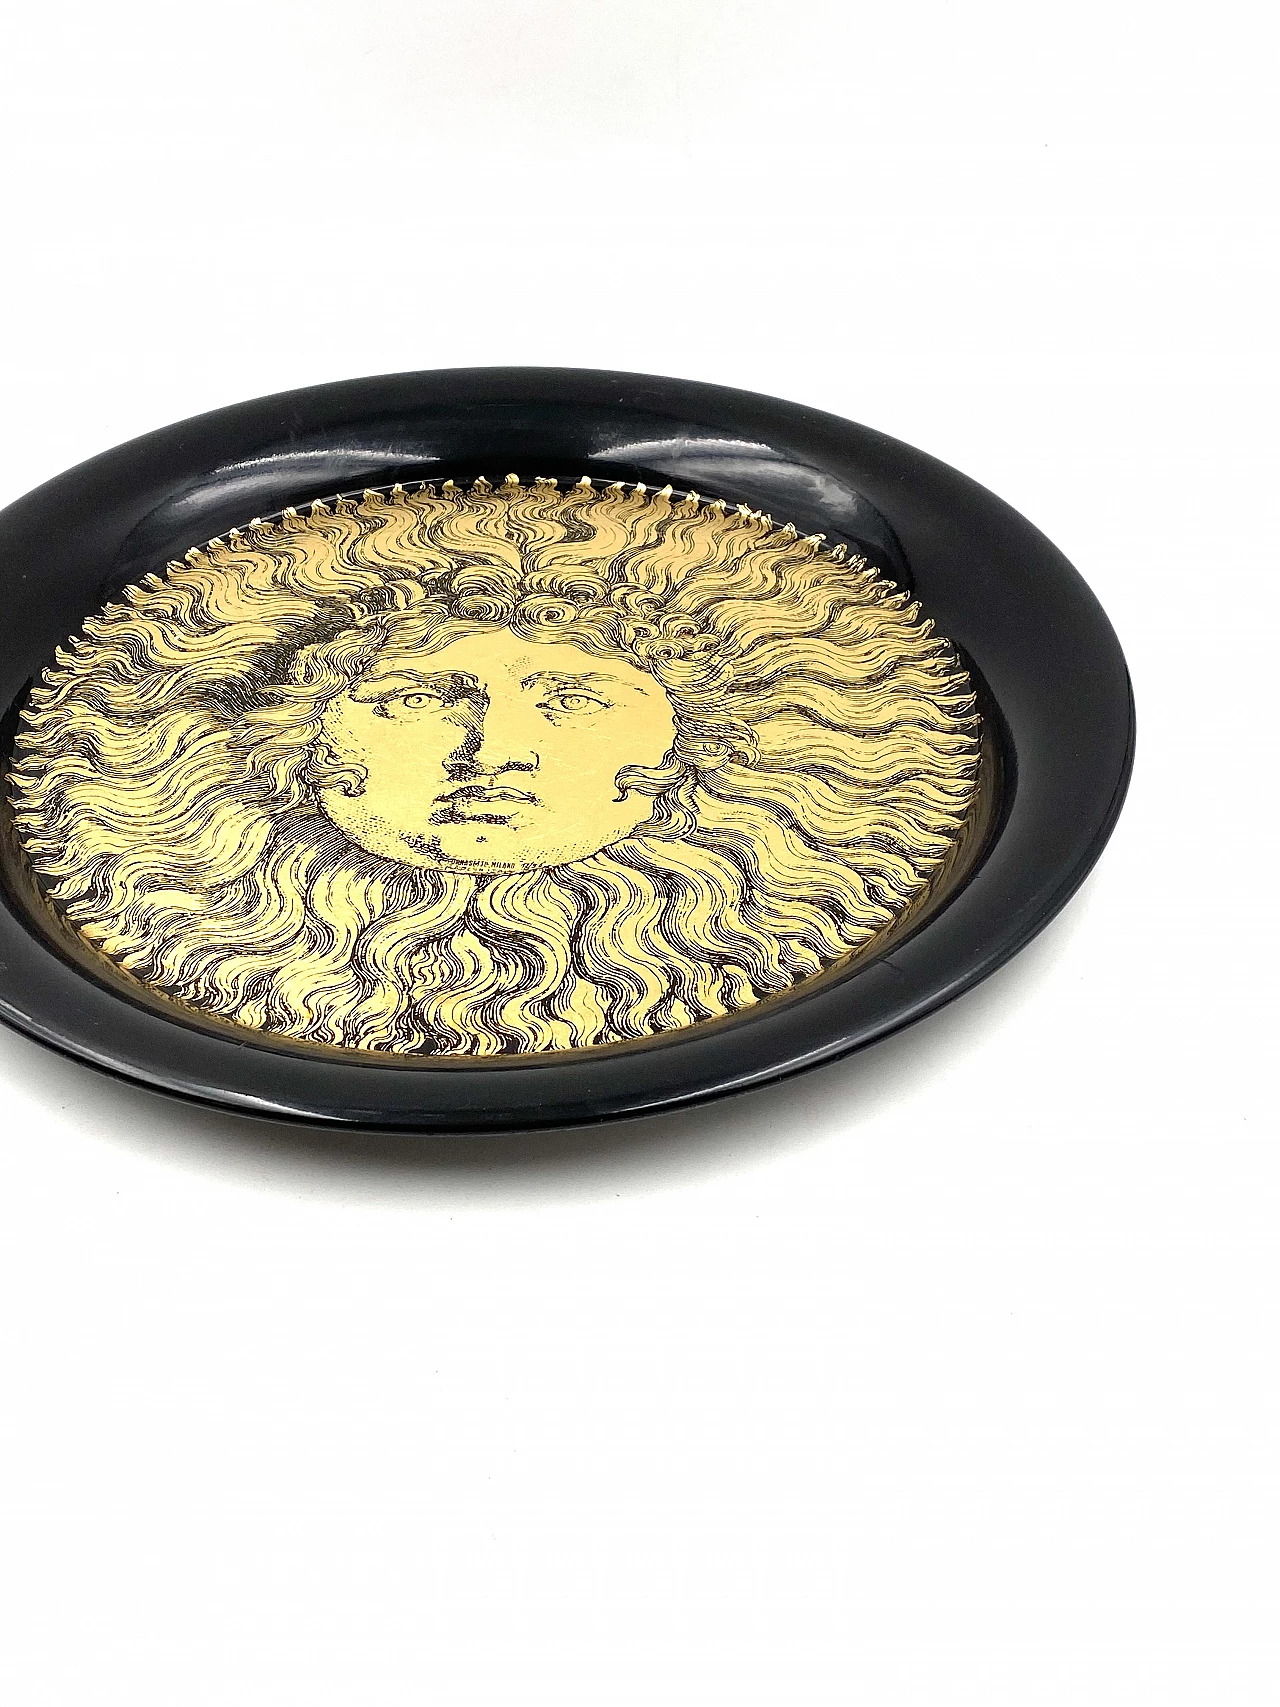 Metal Re Sole tray by Piero Fornasetti, 1950s 13